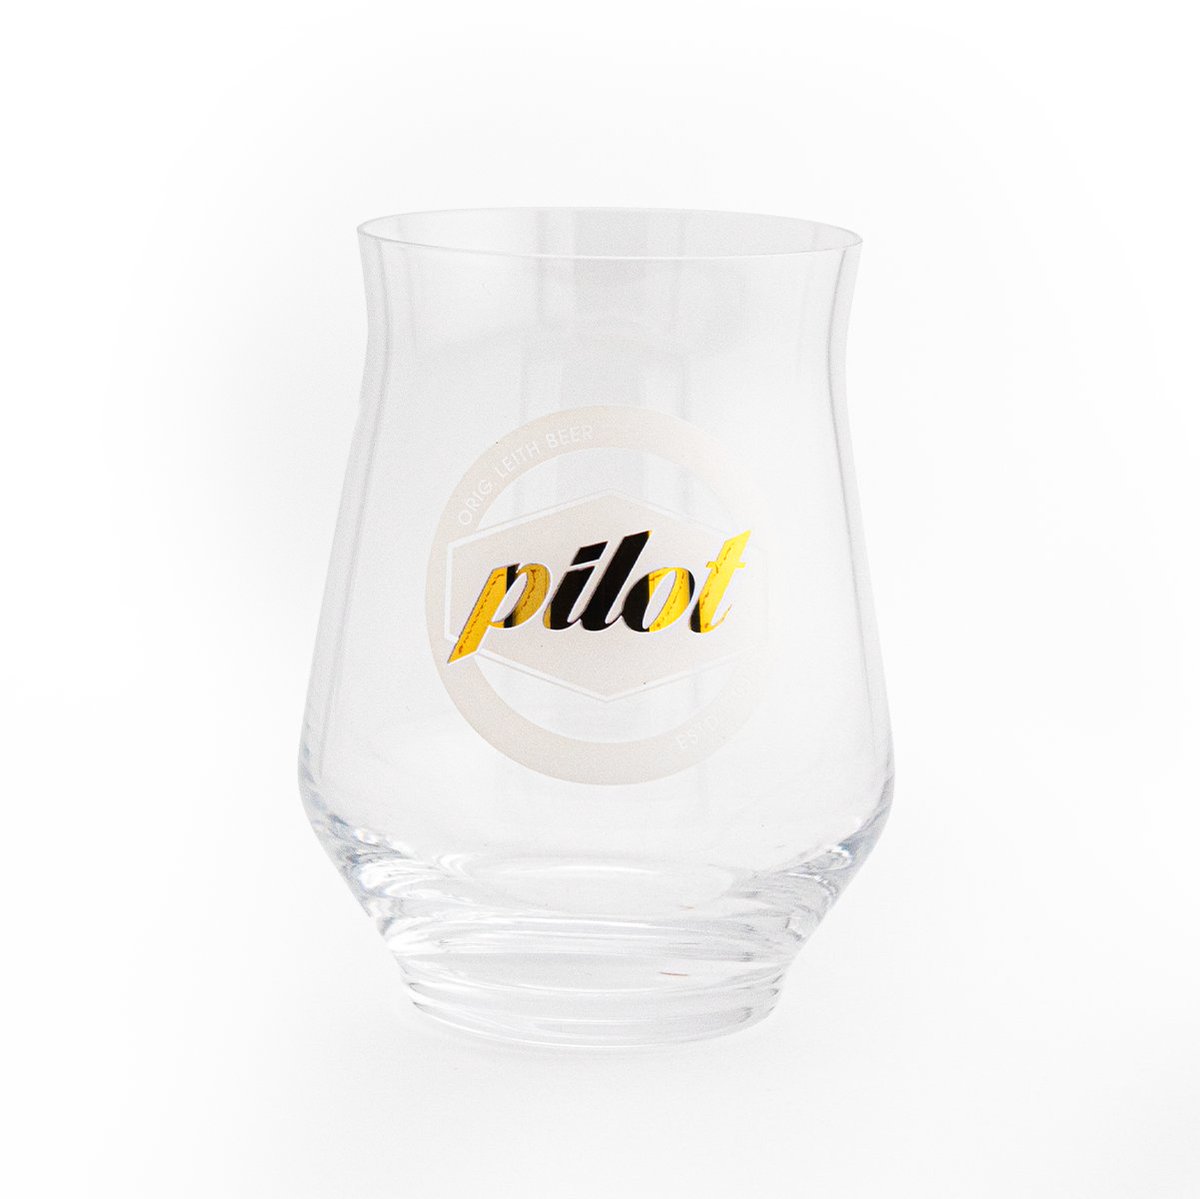 Would you like a method of drinking this that isn't simply pouring the can into your cold, cupped hands? Then why not treat yourself to a one of our glorious brand new 330ml glasses? LOOK AT THE SHINY GOLD LOGO! pilotbeer.co.uk/collections/me…